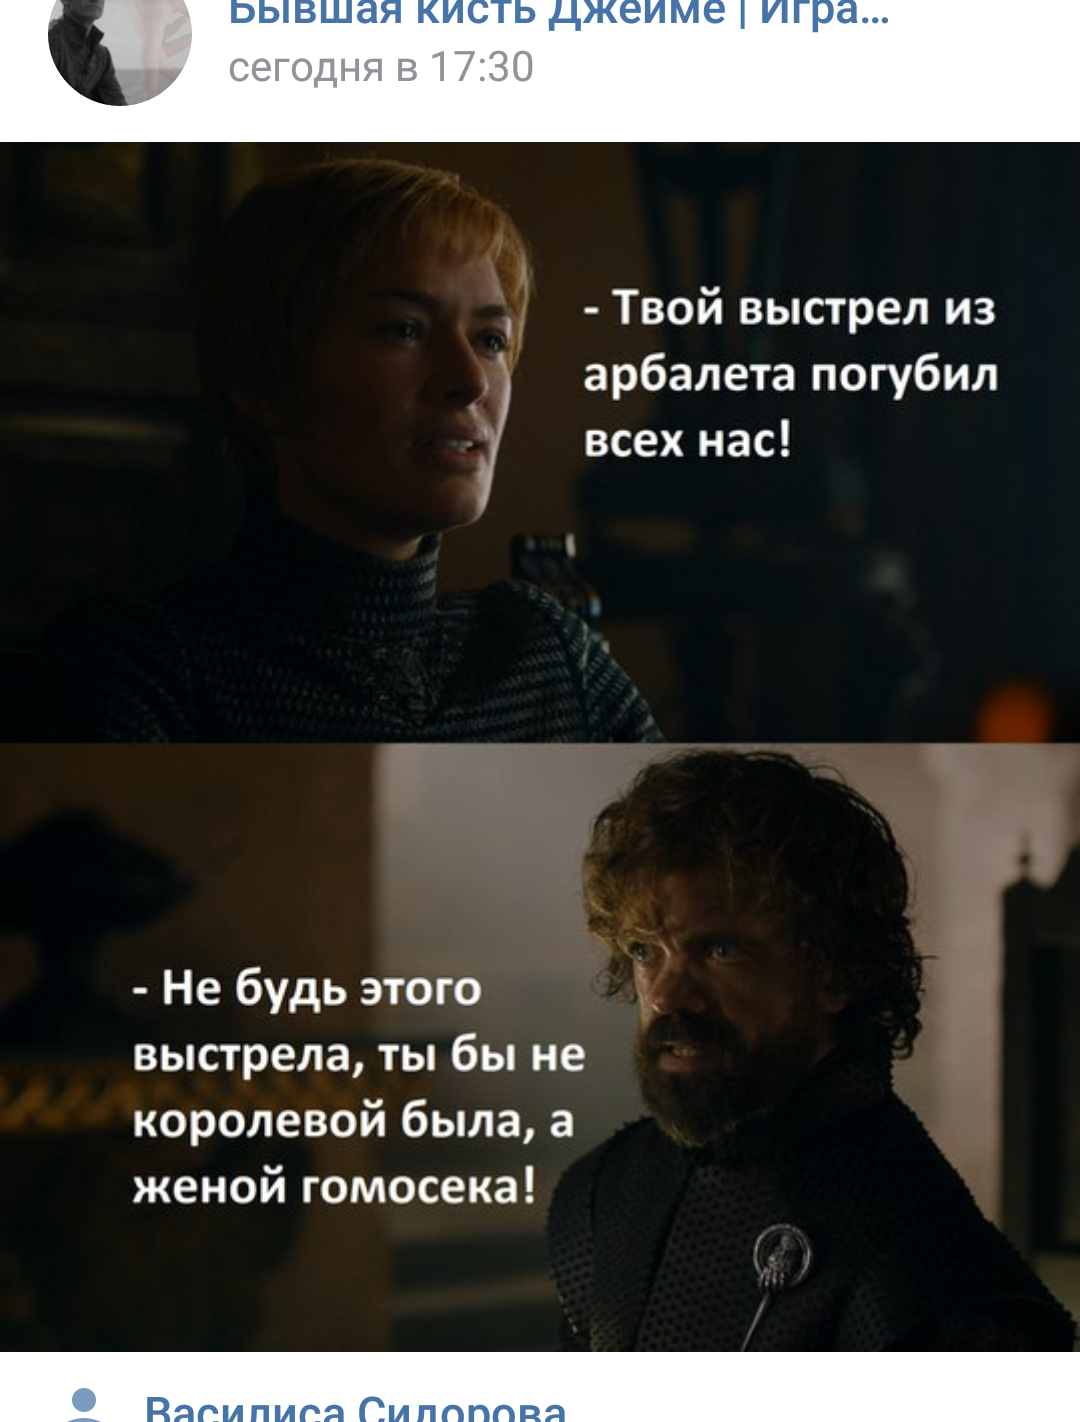 iron homosexual - In contact with, Screenshot, Game of Thrones, iron fist, Loras Tyrell, Longpost